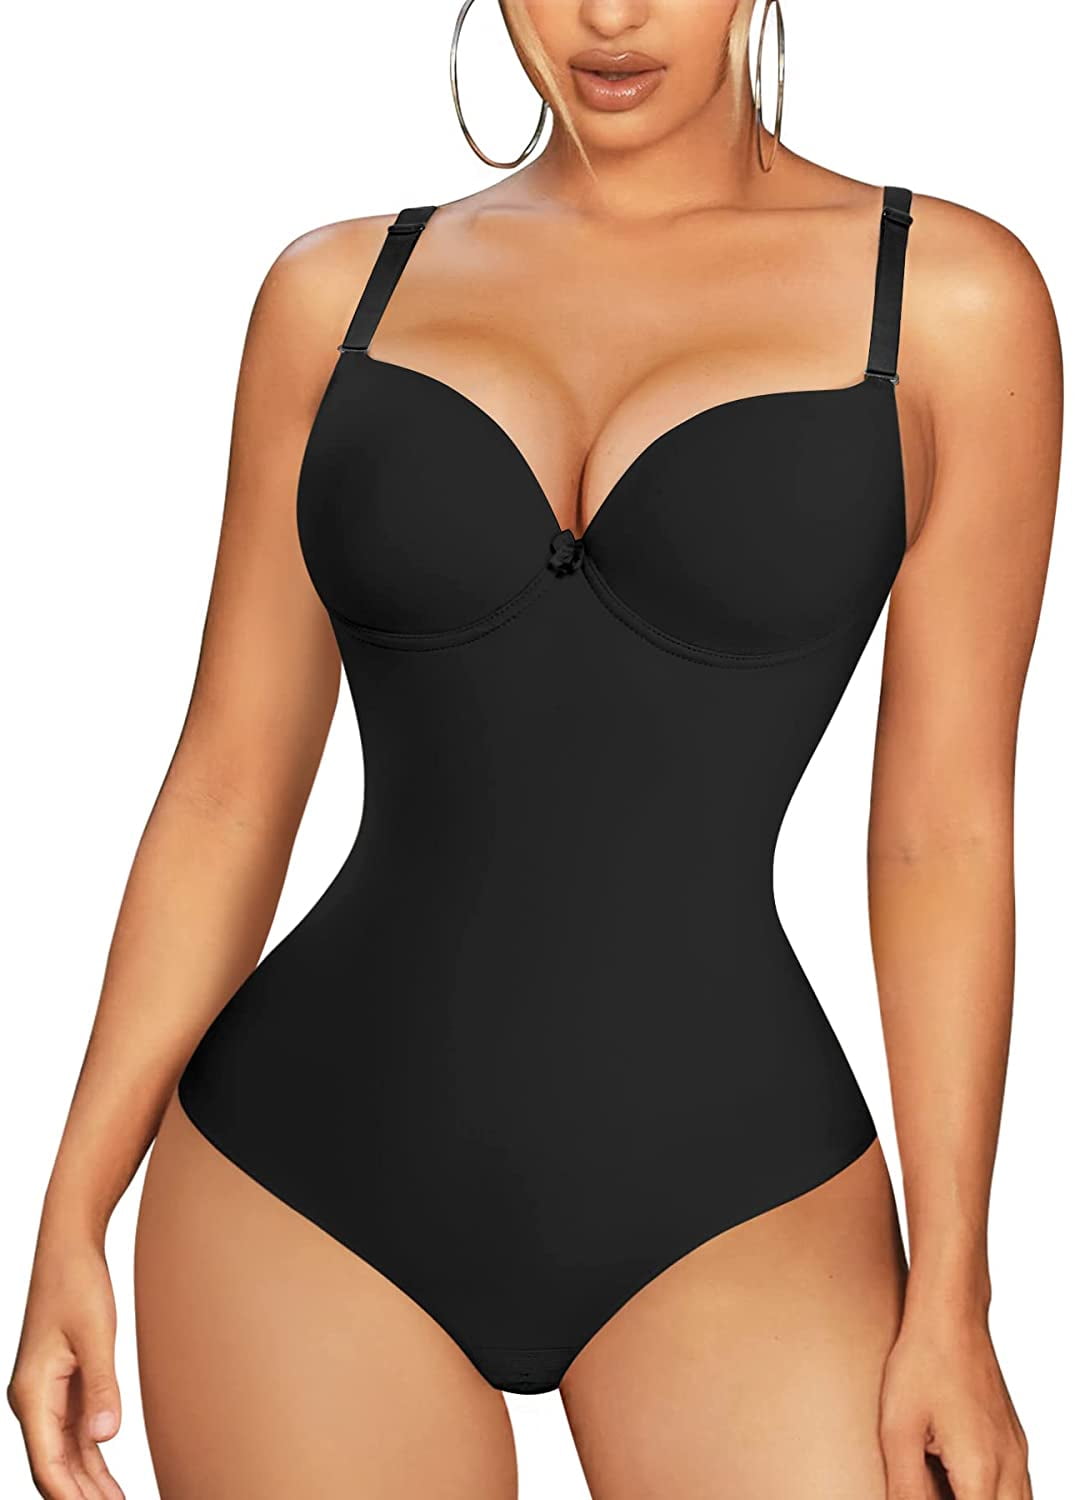 Bodysuit Shapewear with Built in Bra and Adjustable Shoulder Straps — Wairby